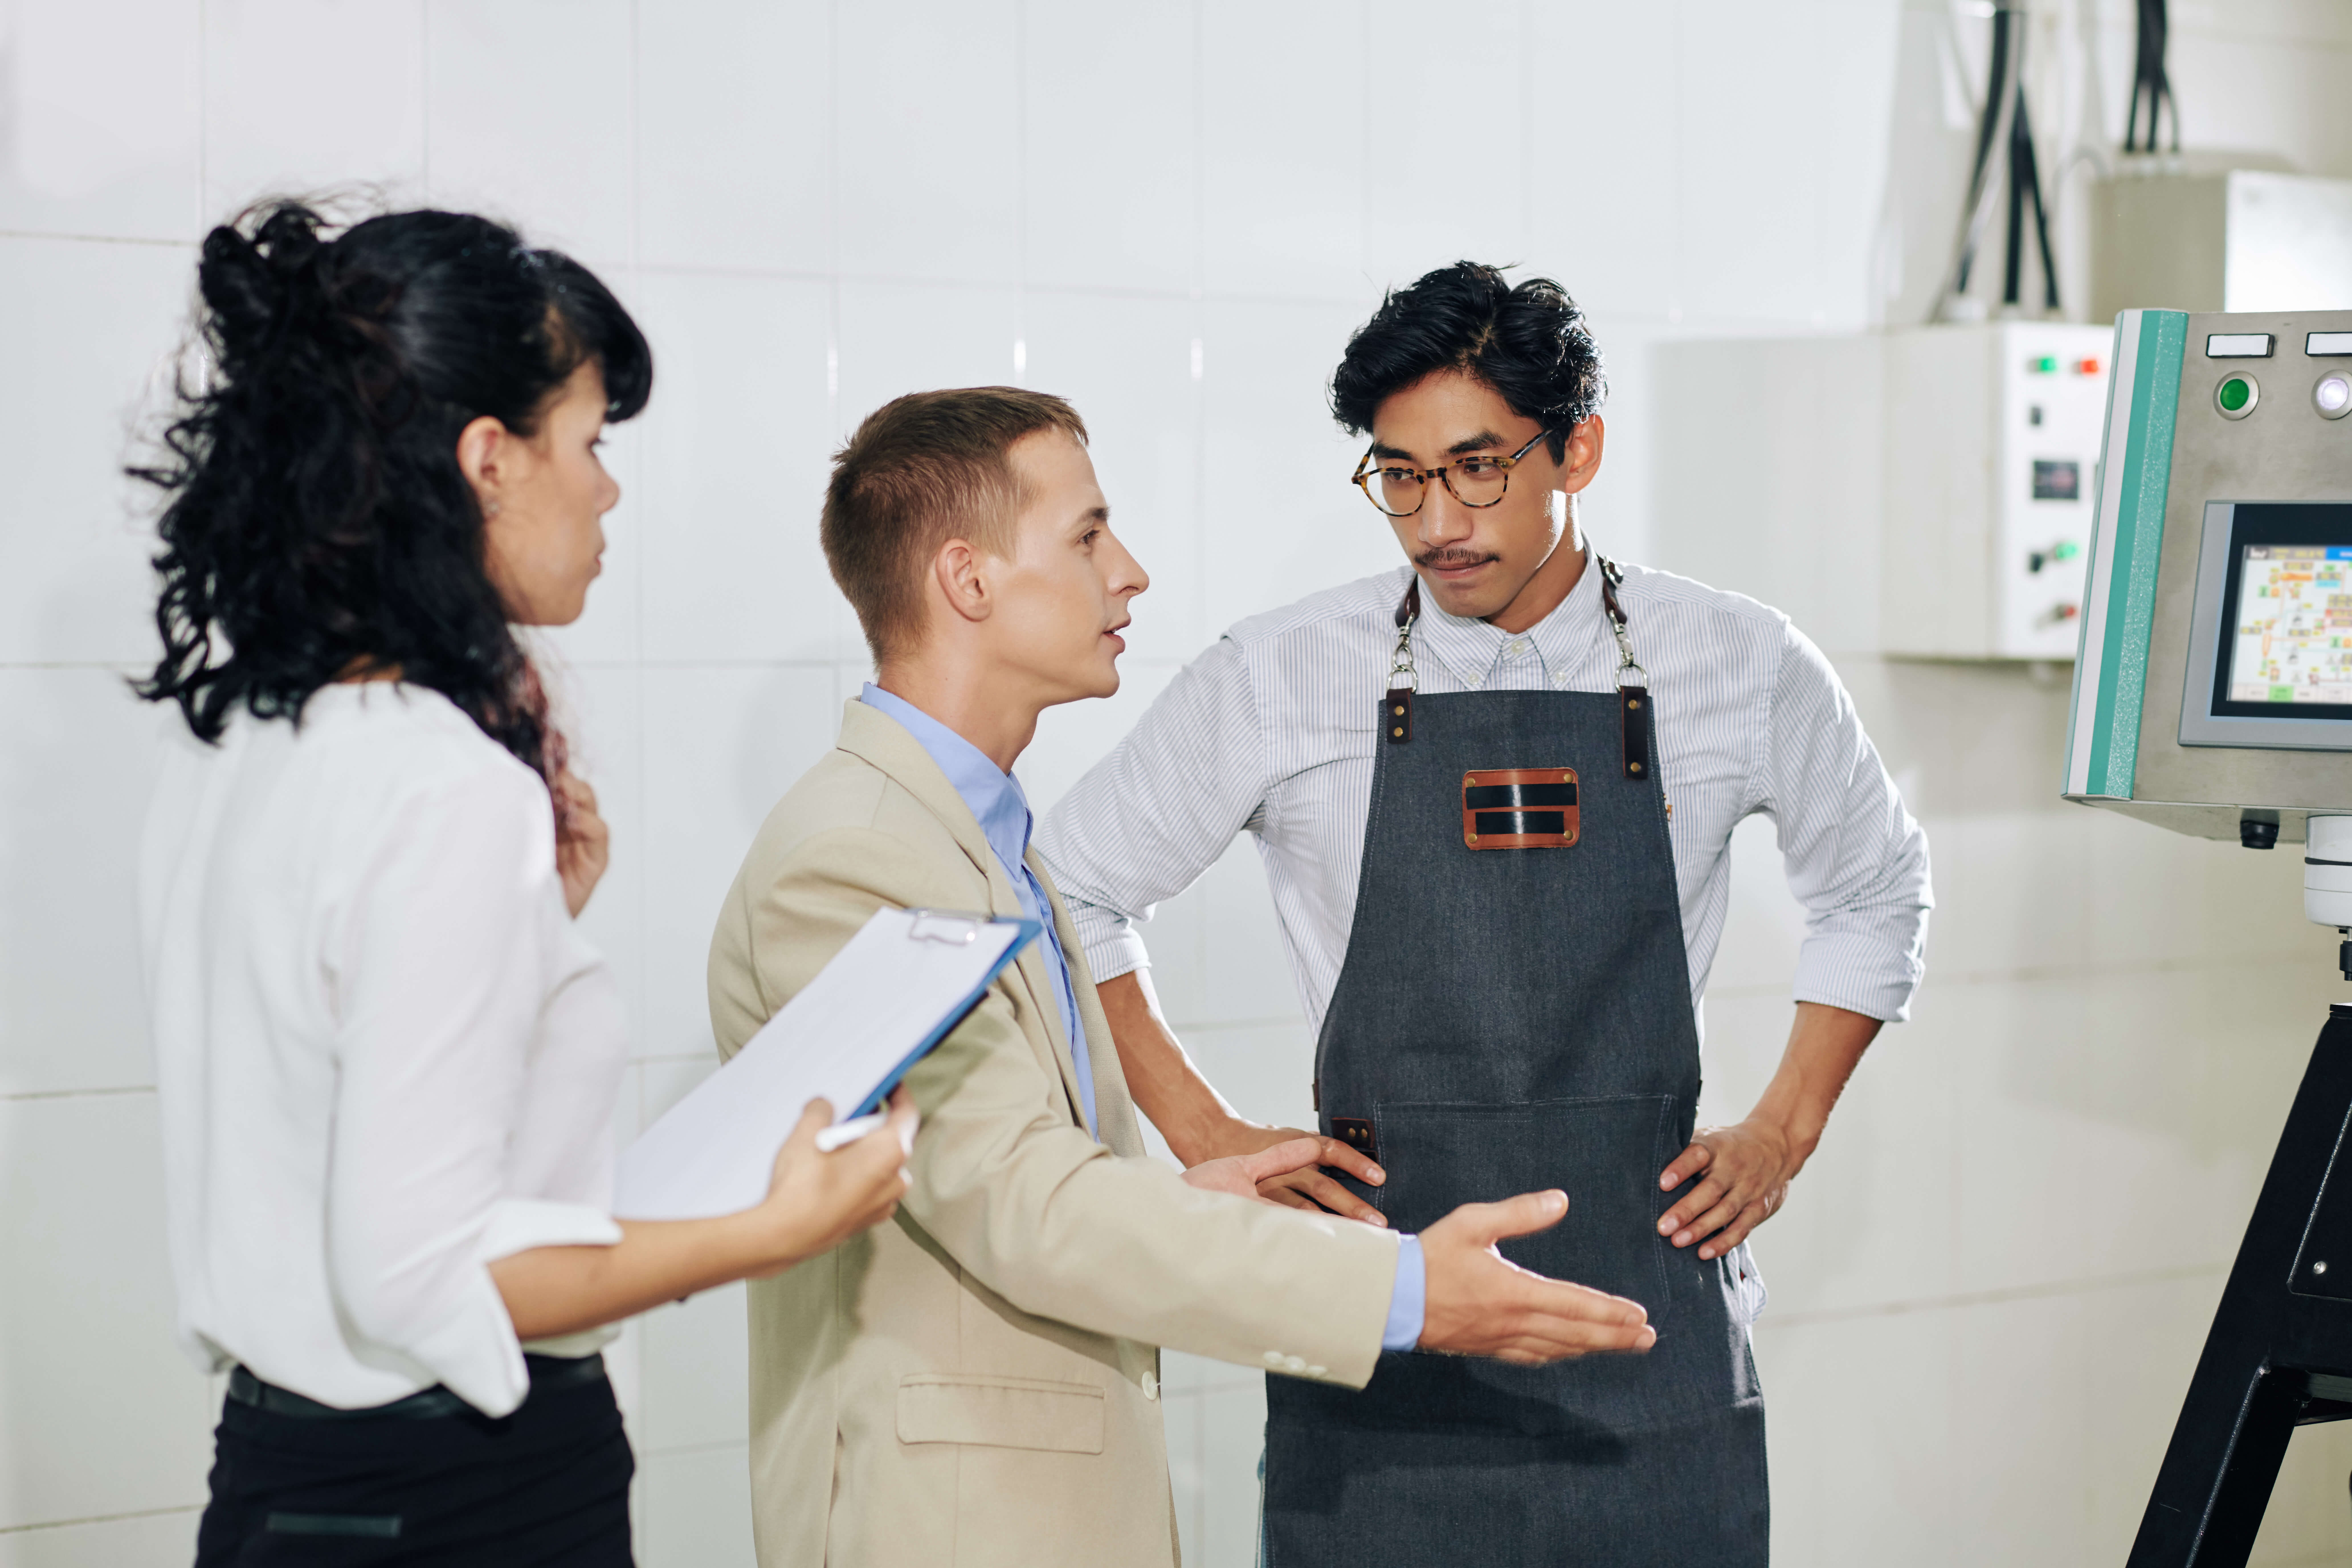 Small manufacture owner in apron talking to business partner and his assistant